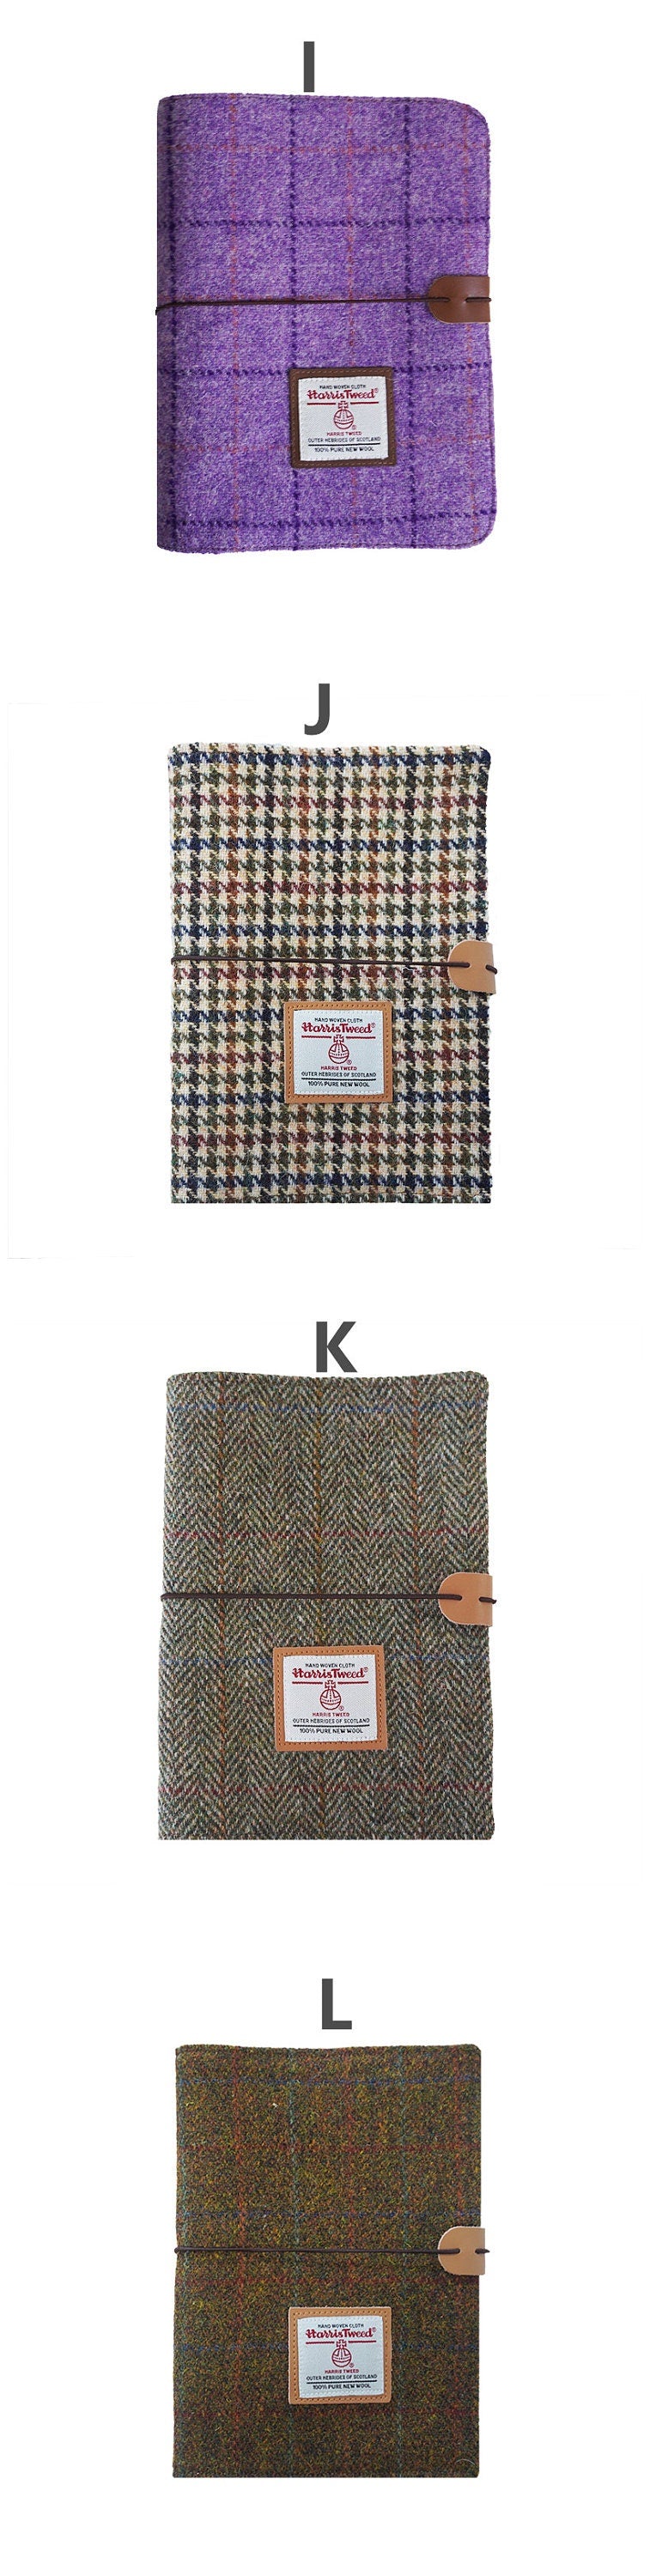 Personalized A5 Wool Cover Handmade Notebook Retro Plaid Journal Woolen Fabric Loose-leaf Notepad Student Book Portable Sketch Book 12 Color